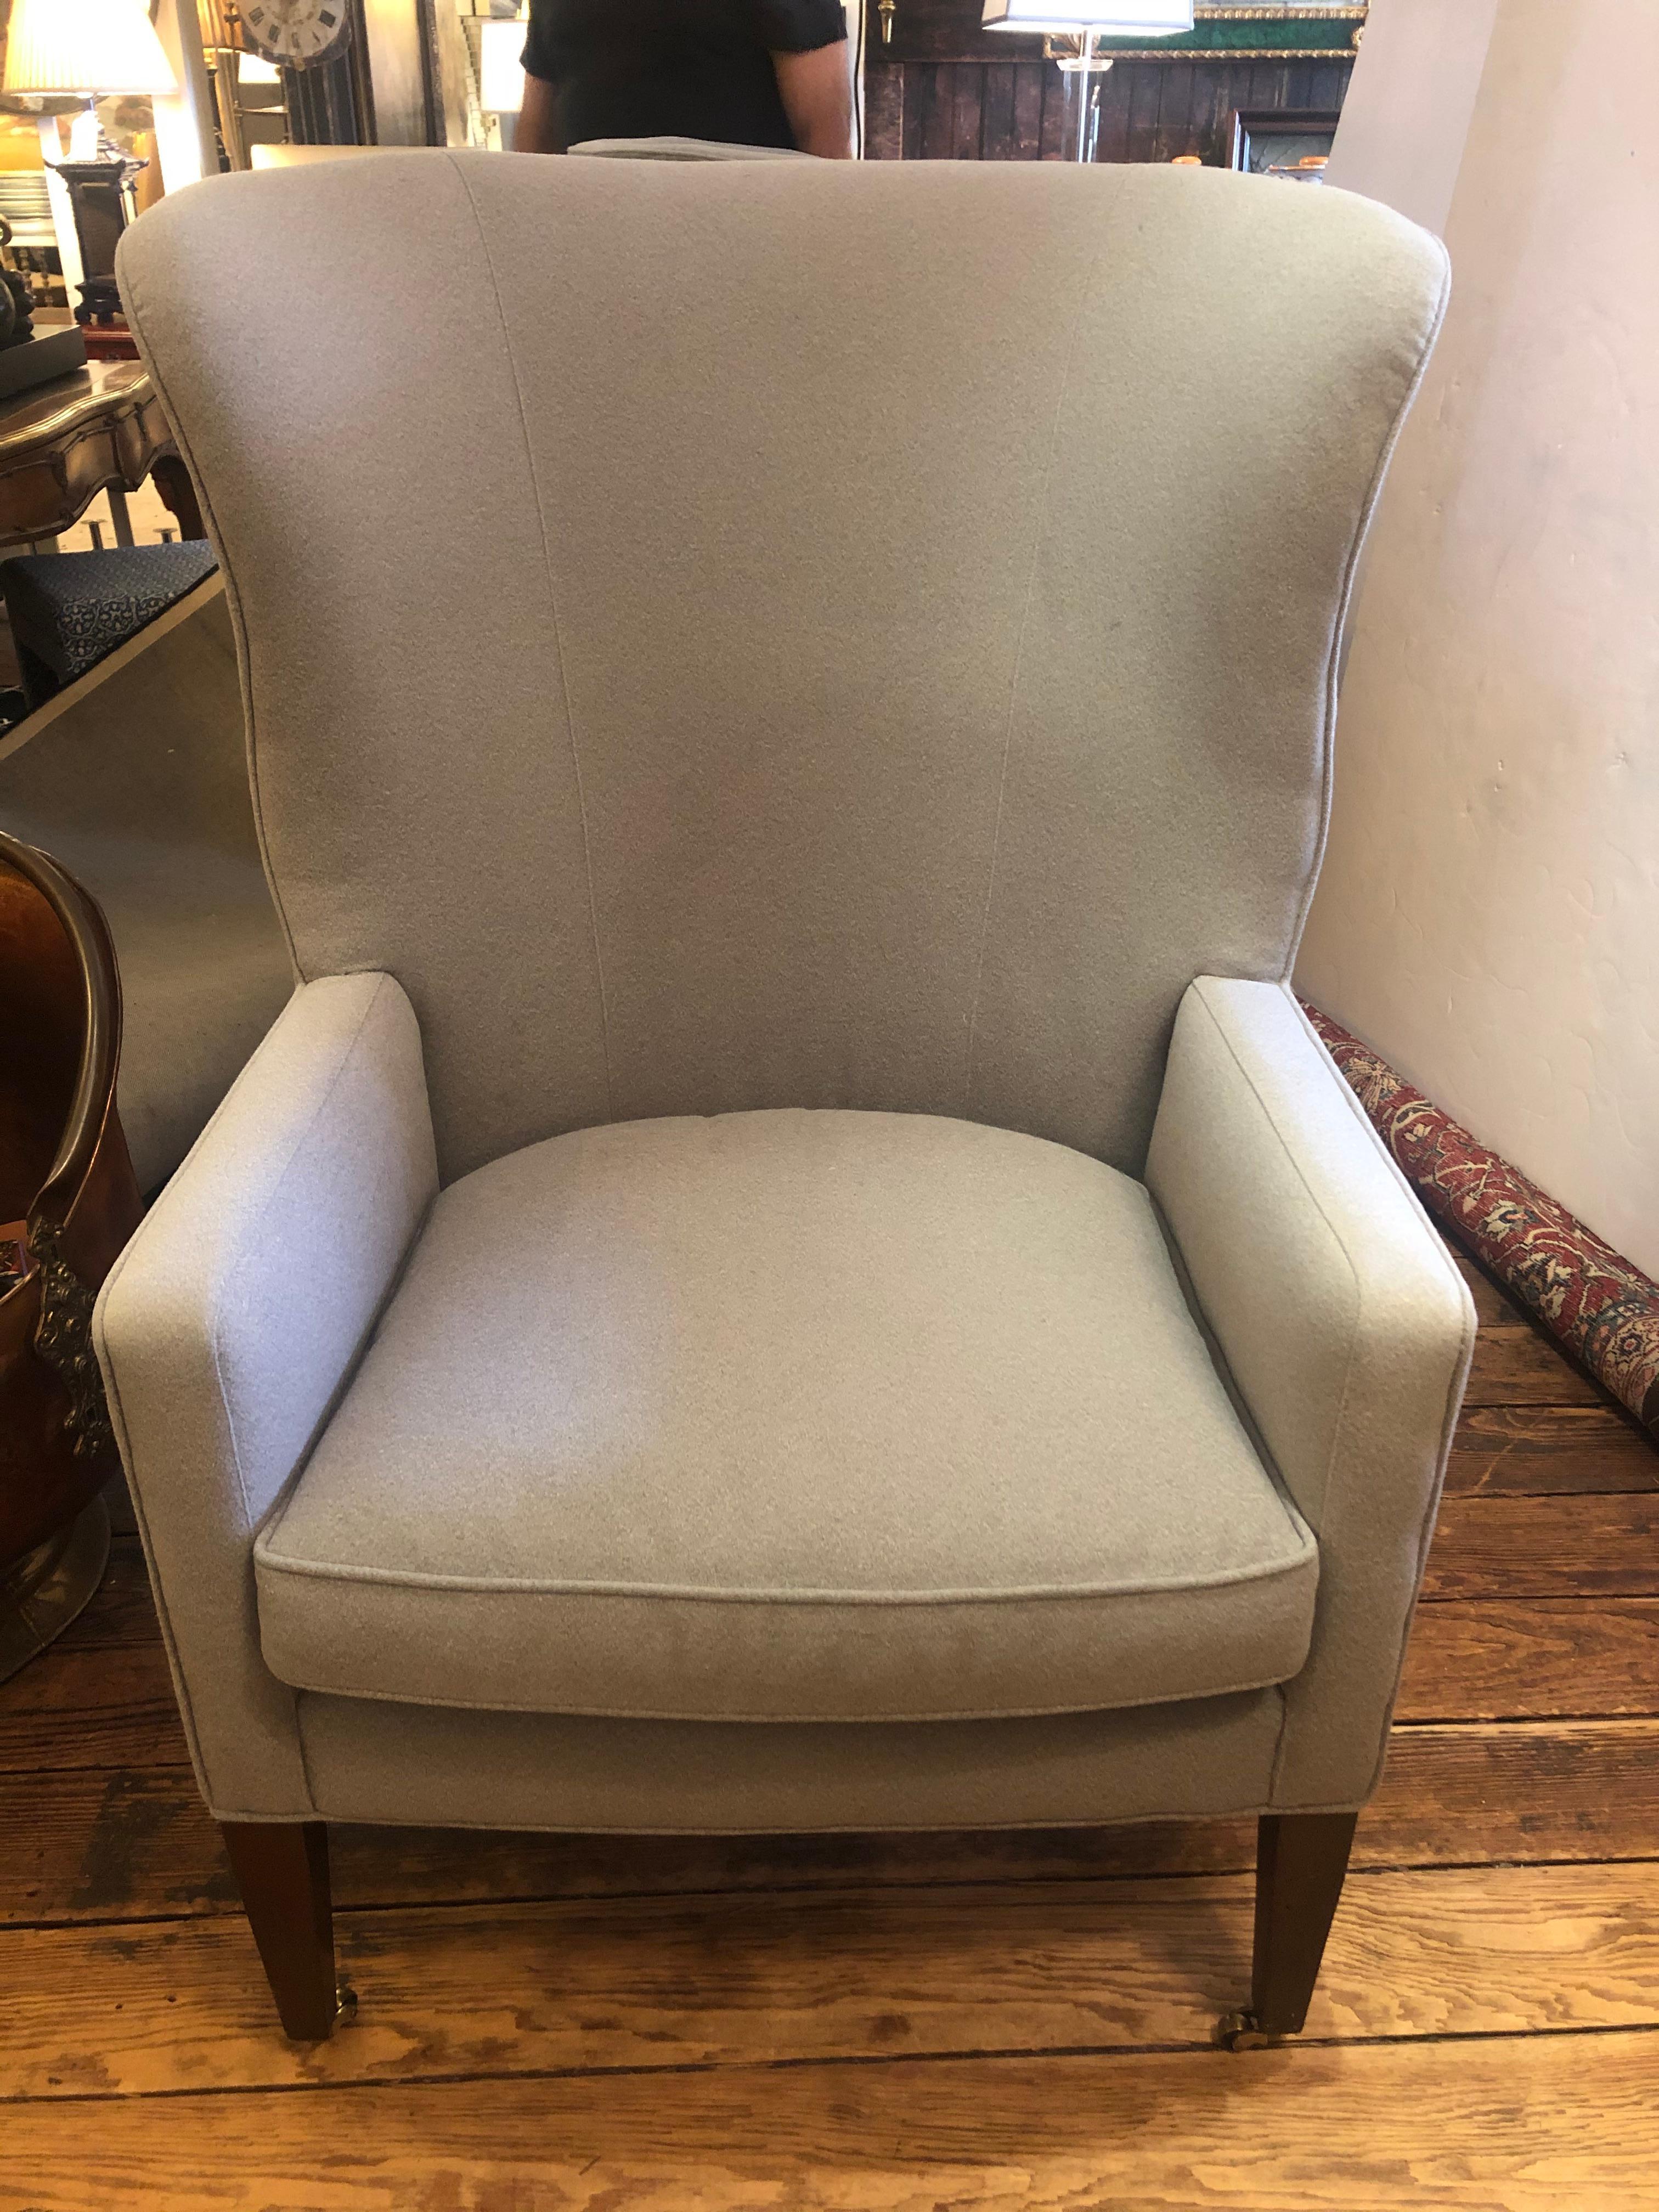 North American Sumptuous Pair of Grey Flannel Upholstered Barrel Back Wing Chairs